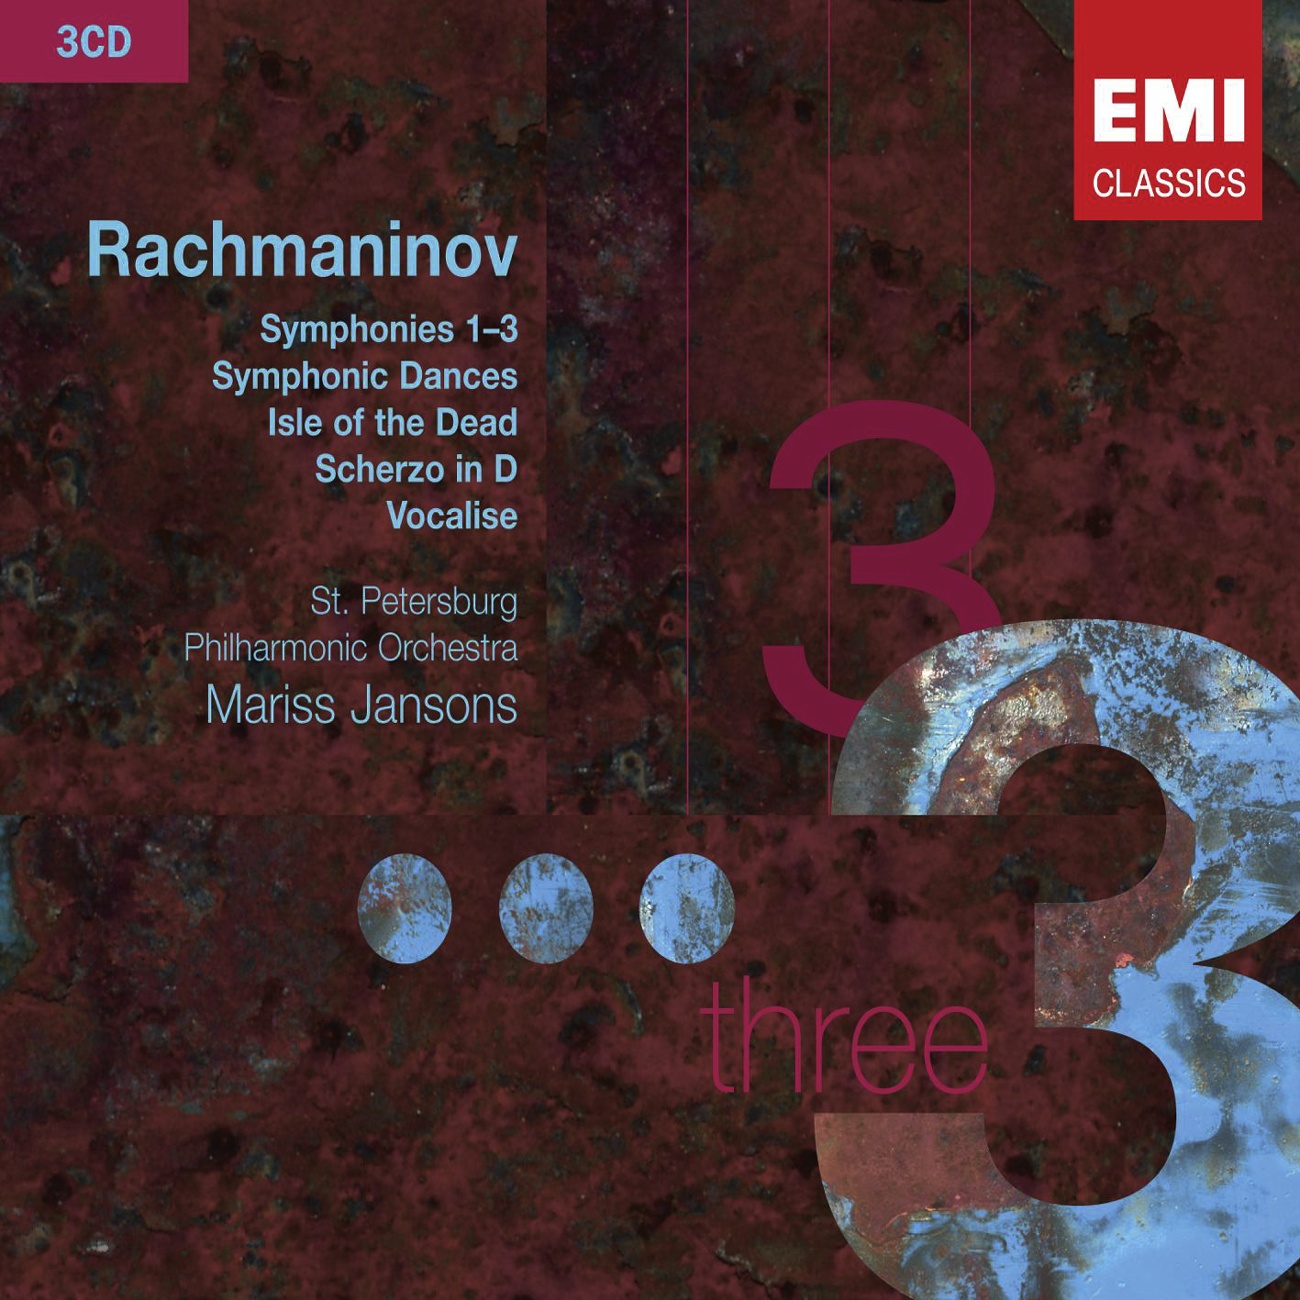 Symphony No. 1 in D minor, Op. 13: Third movement: Larghetto